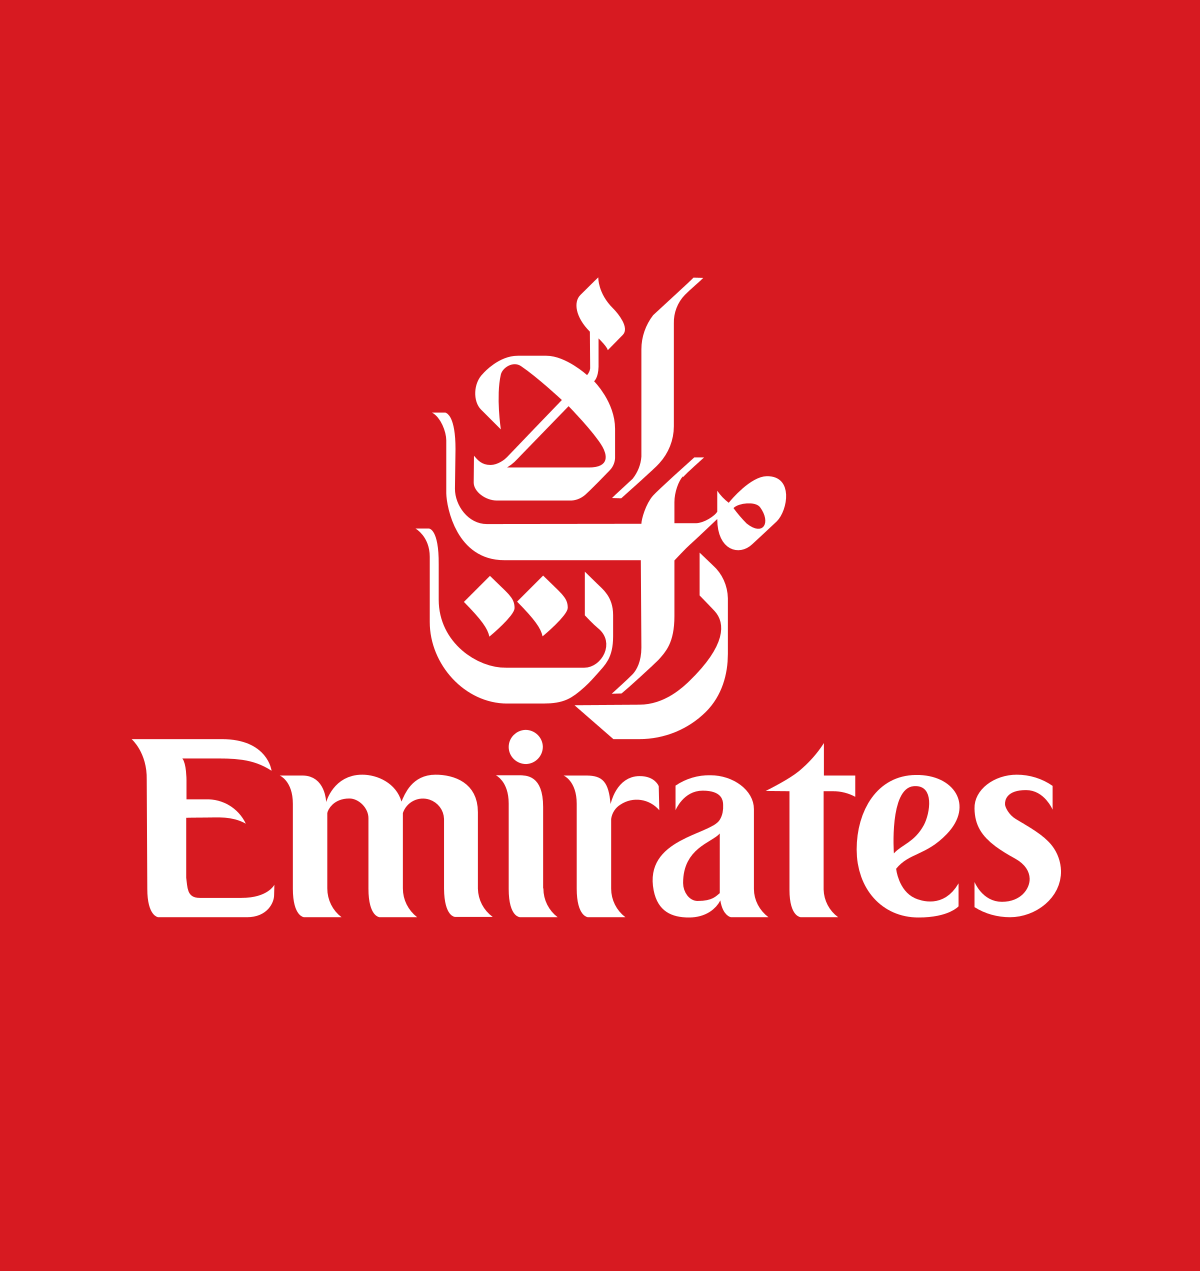 Gold Airline Logo - Emirates (airline)